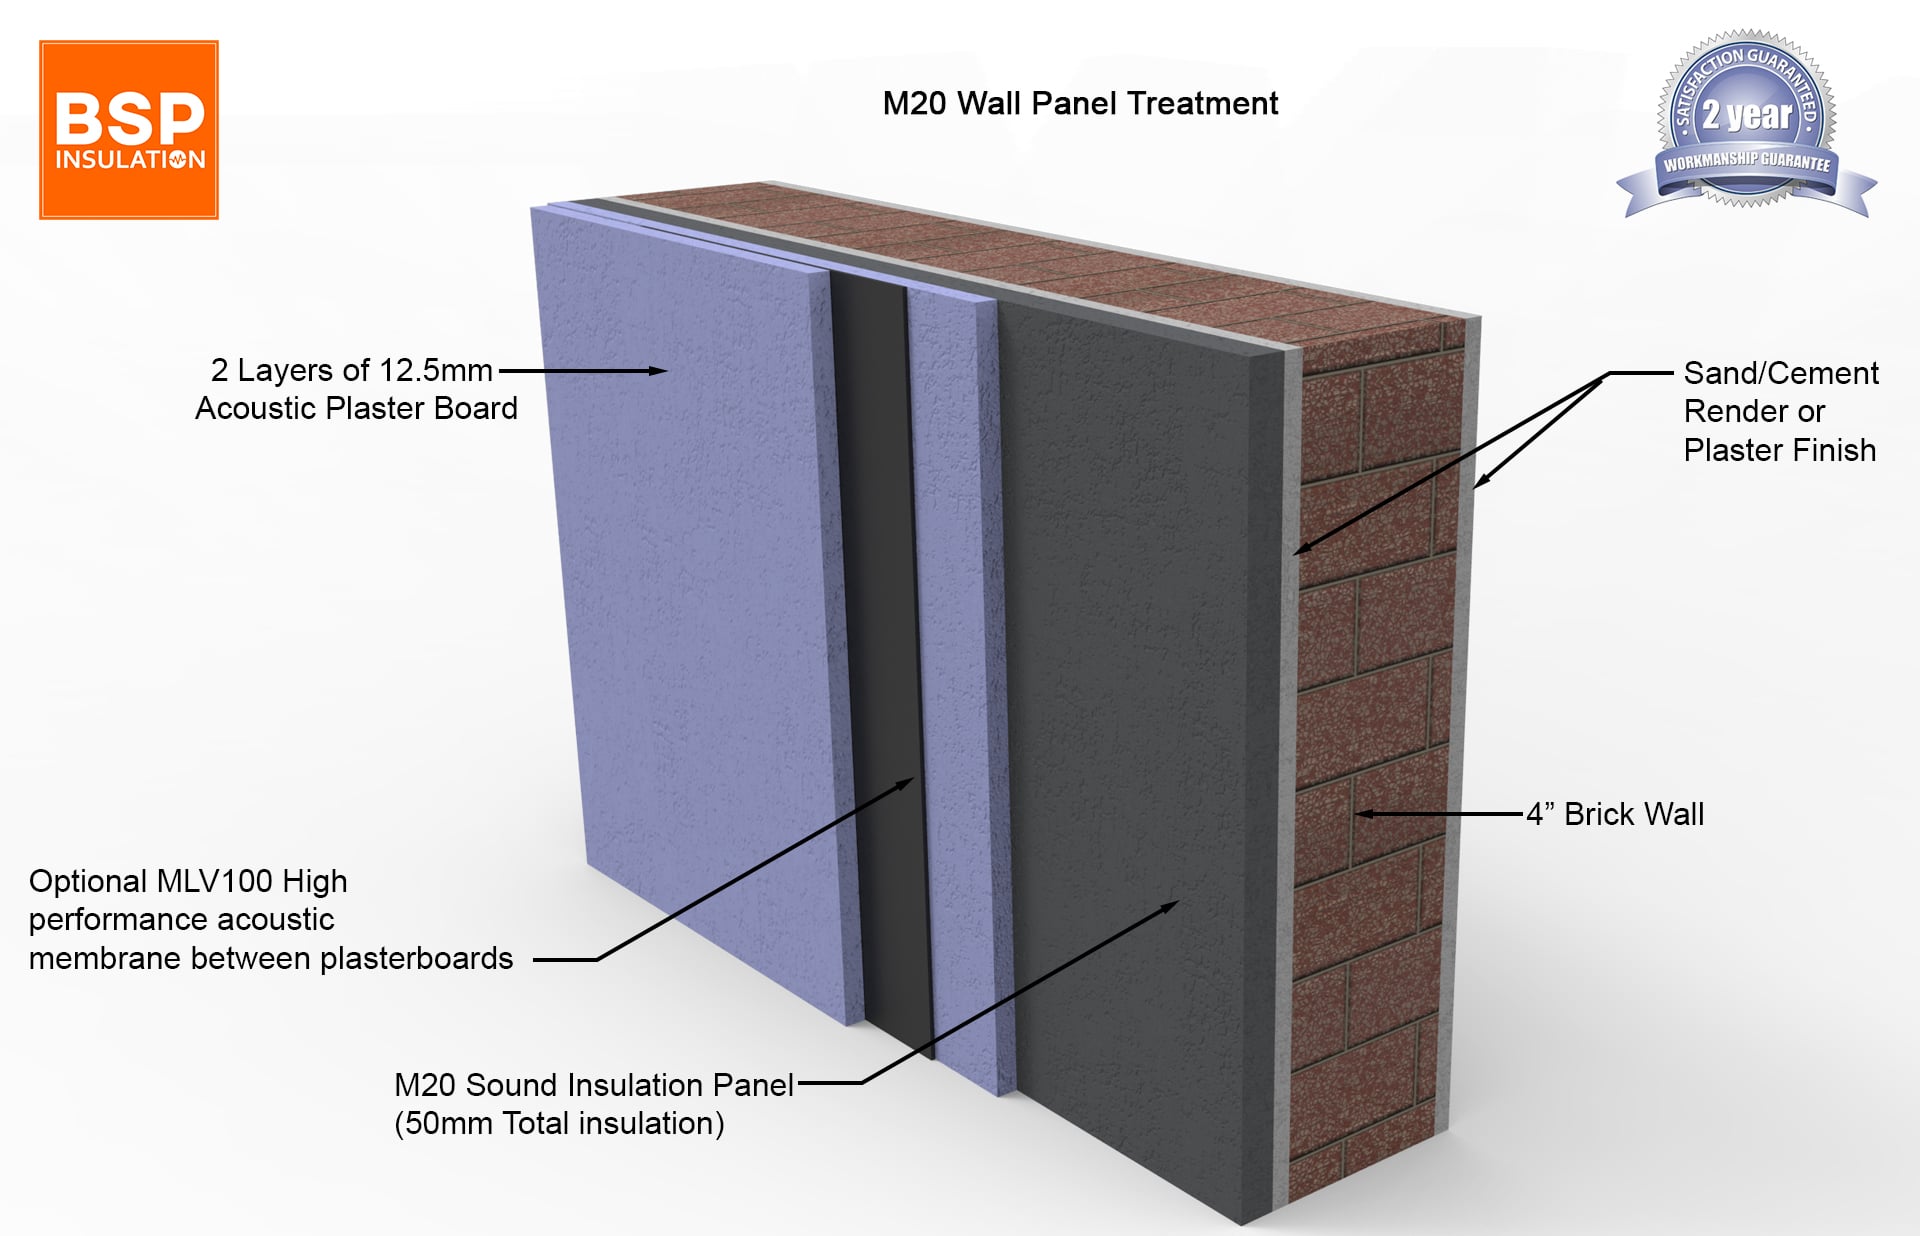 Soundproofing walls